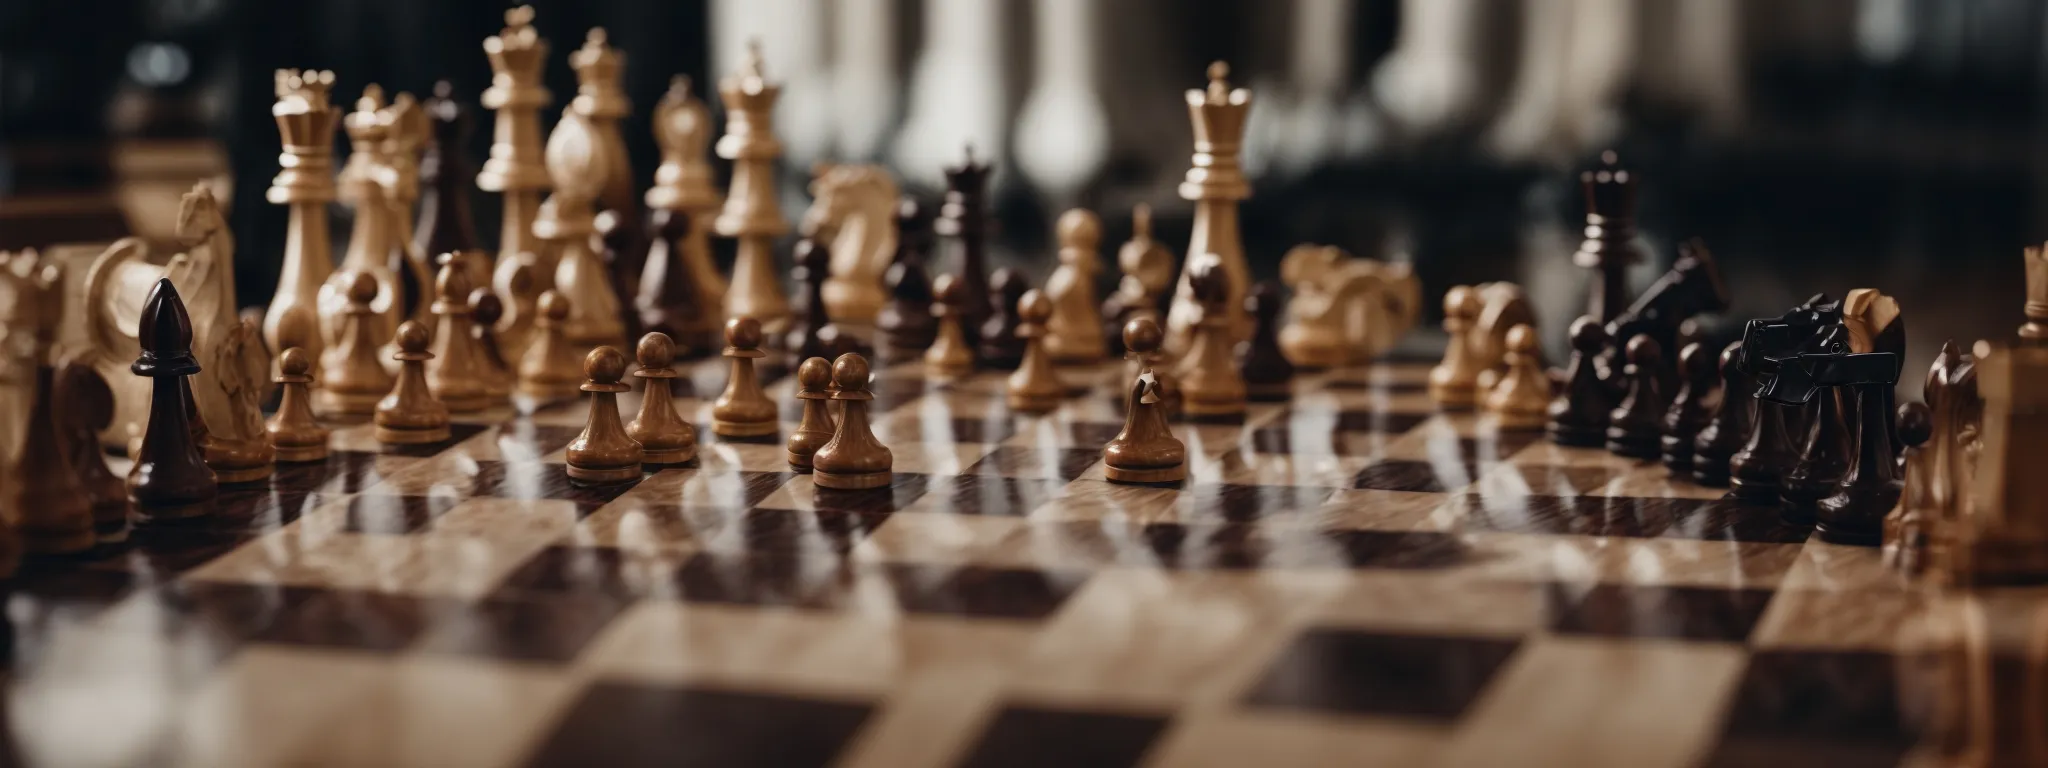 a chess board poised mid-game, symbolizing strategy and tactics employed in competitive seo landscapes.